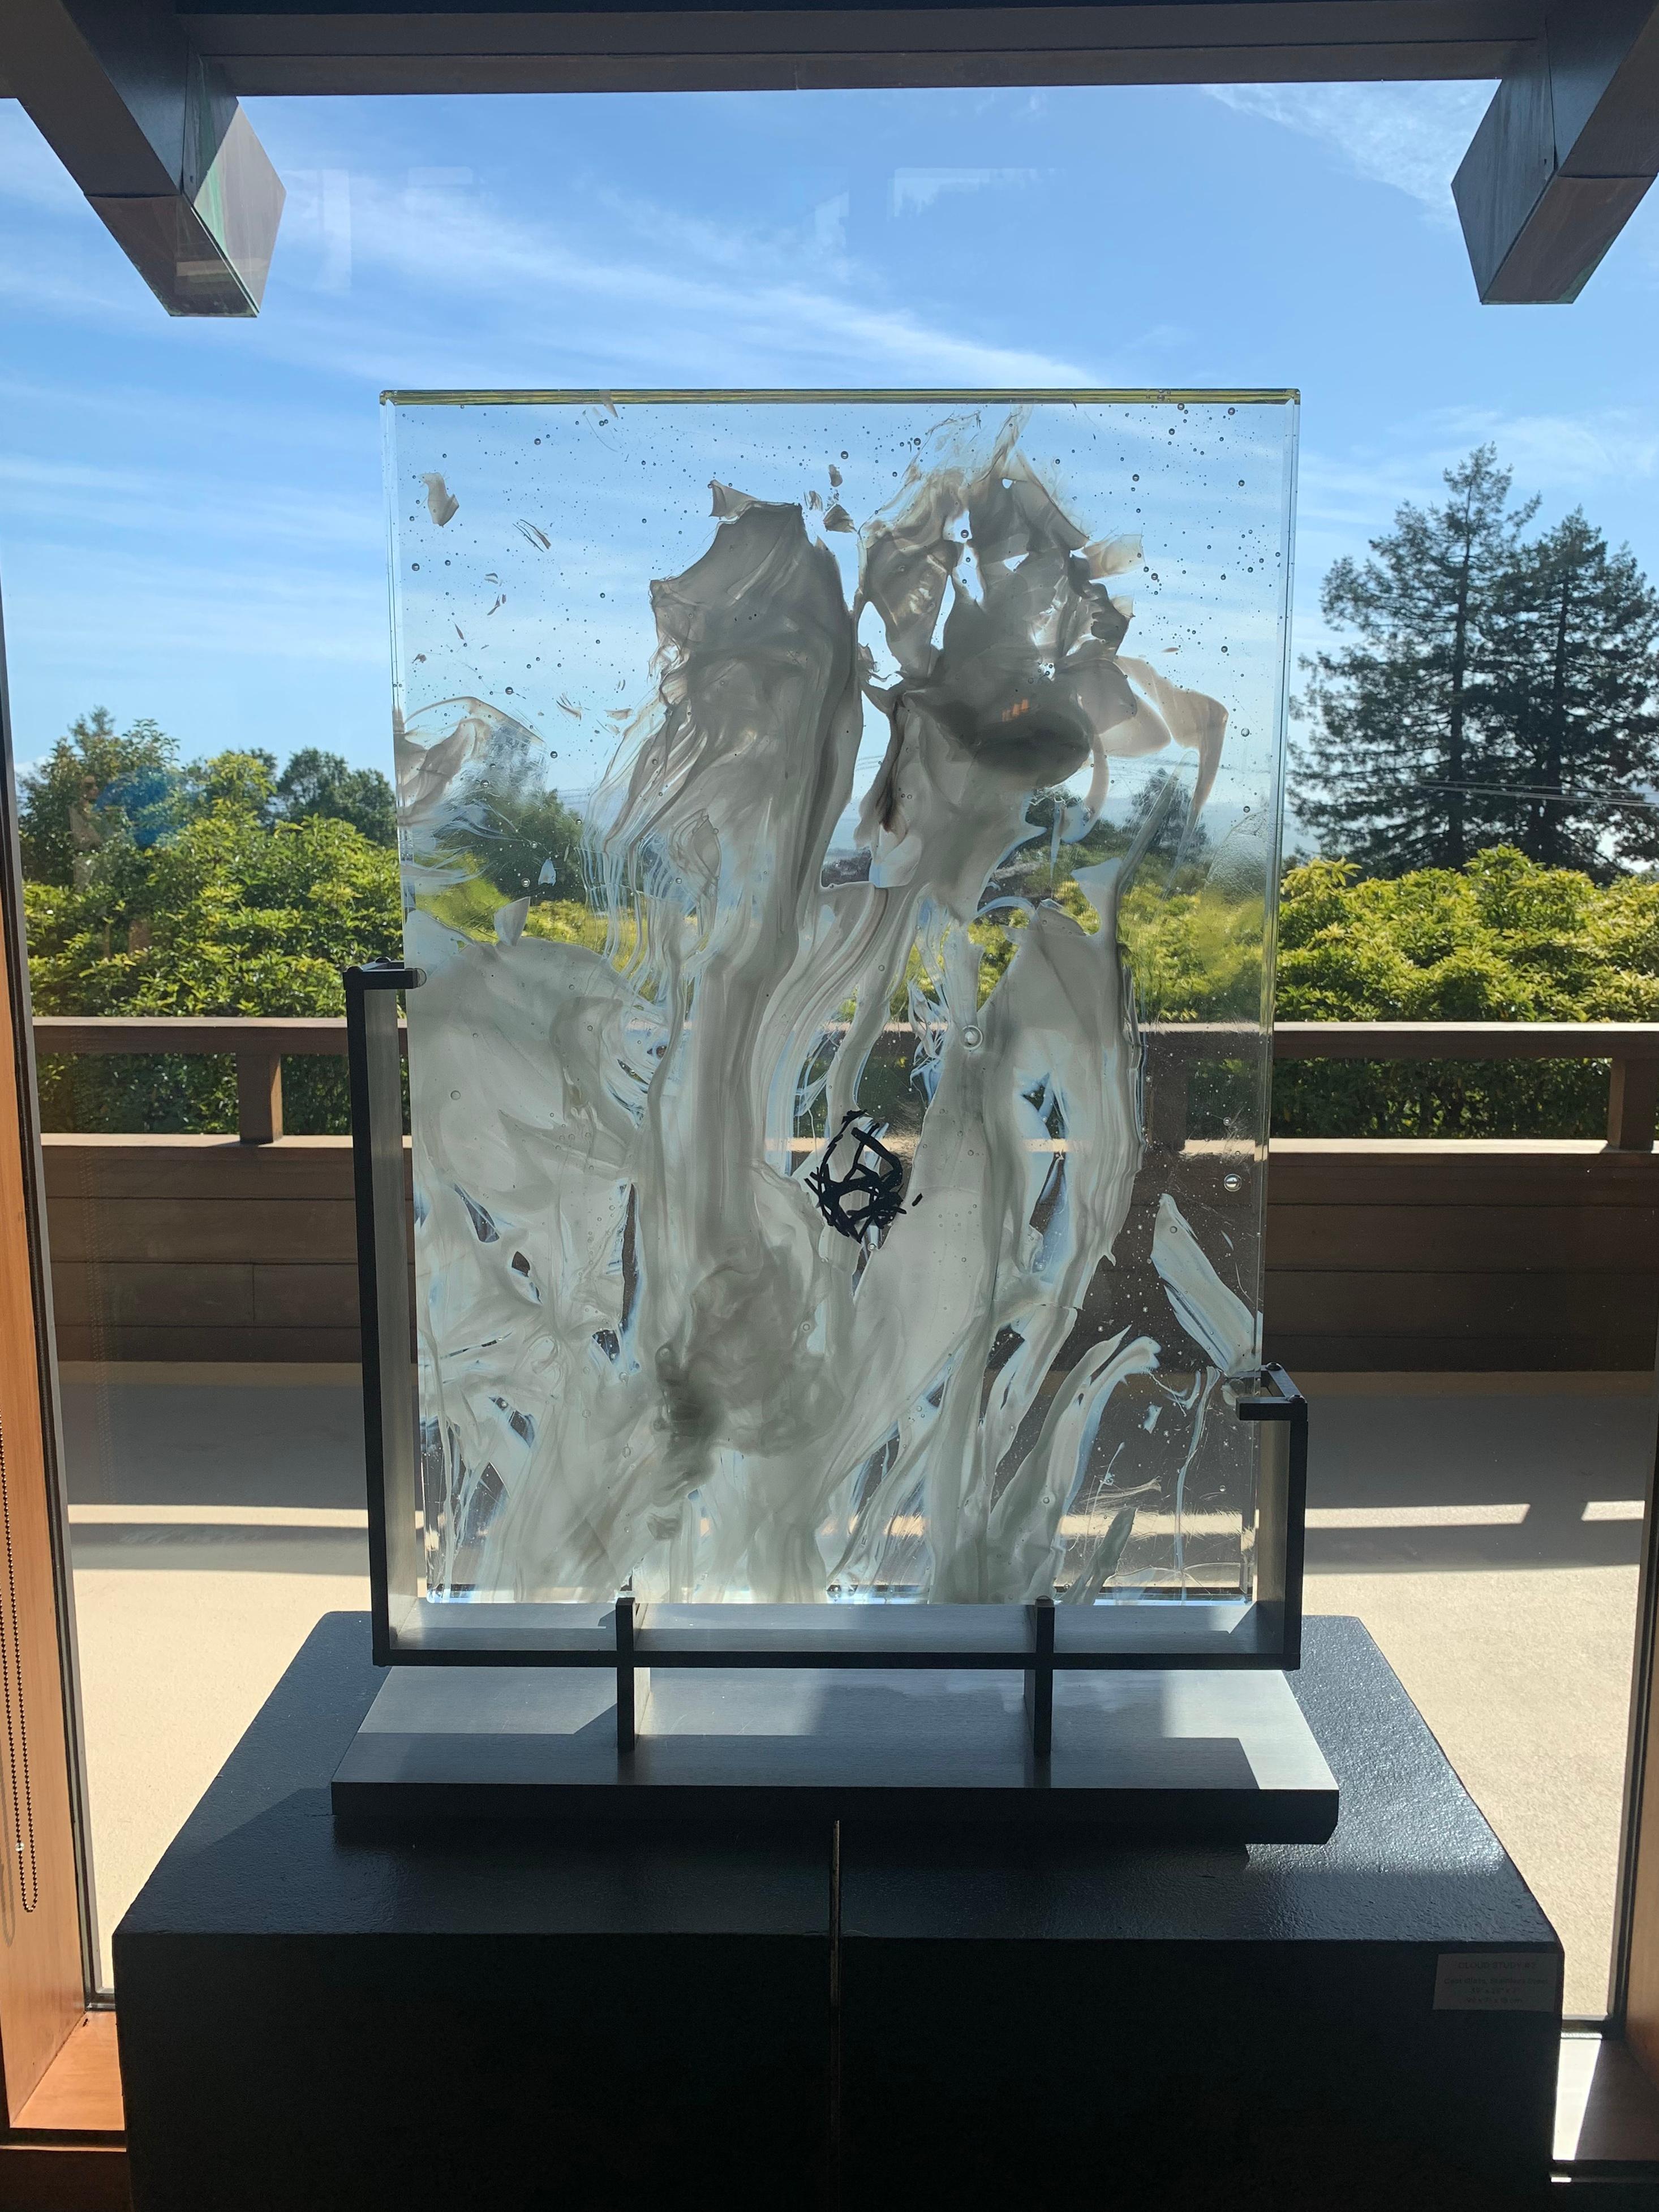 Cloud Study #2 is a contemporary abstract glass sculpture by David Ruth from his Cloud Study Series. It contains hues of white and black painterly brushstroke formations in glass called trails. Trails are created through rolling molten glass into